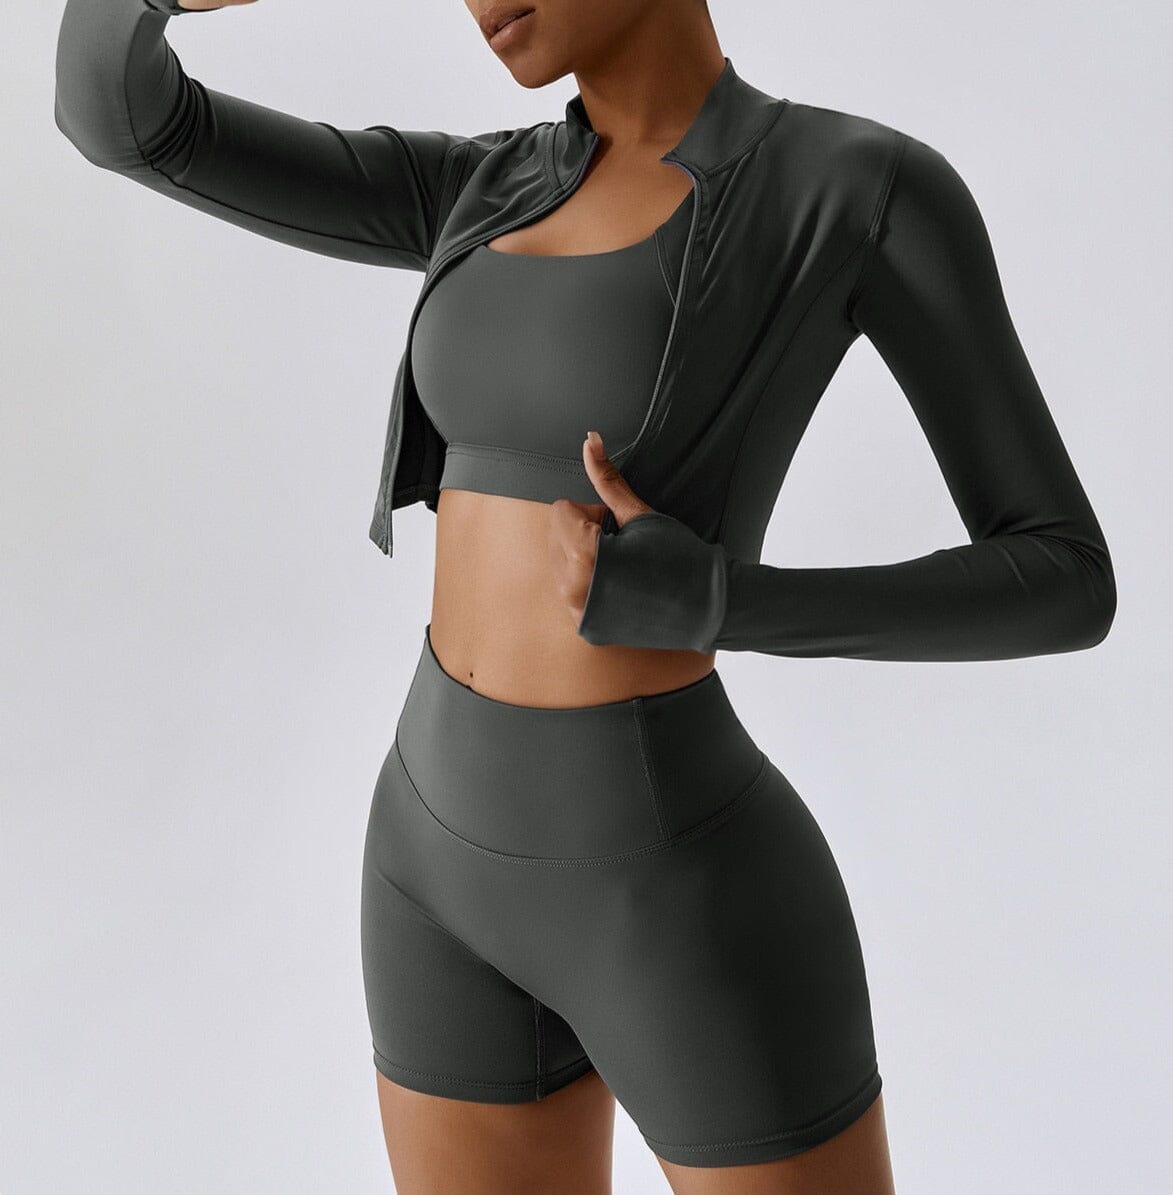 Power Scrunch Trio - Shorts + Top + Jacket Sets Starlethics 